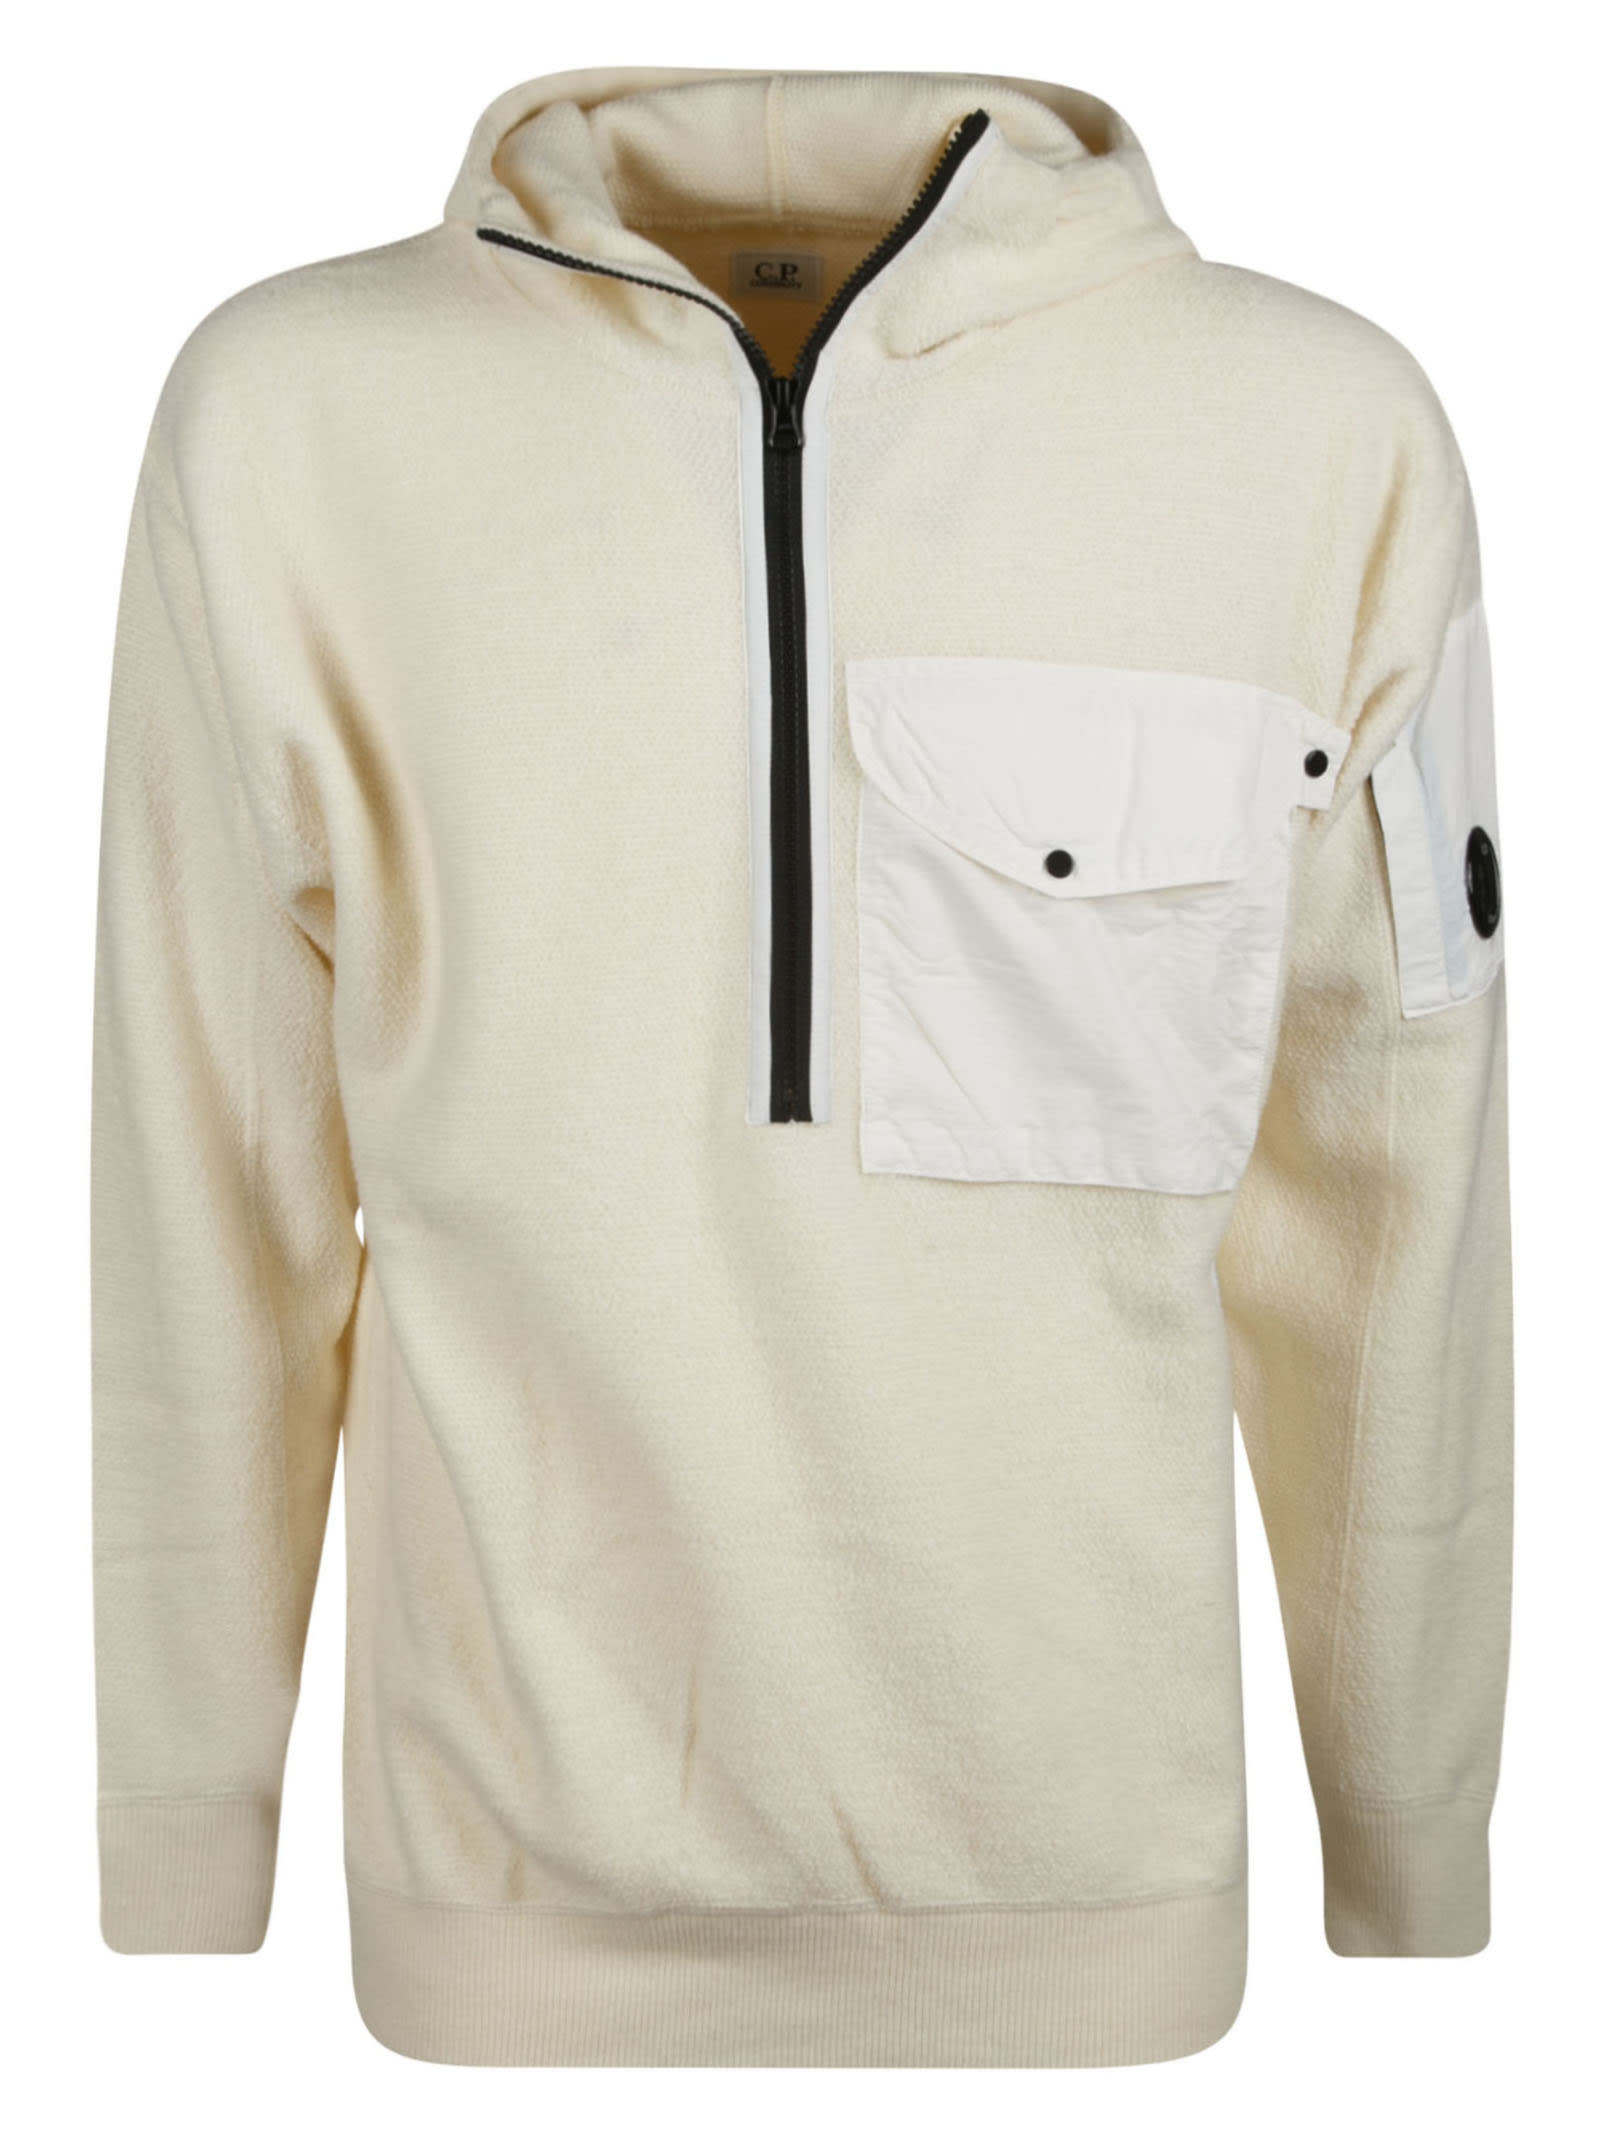 C.P. Company Patched Pocket Hooded Zip Sweater